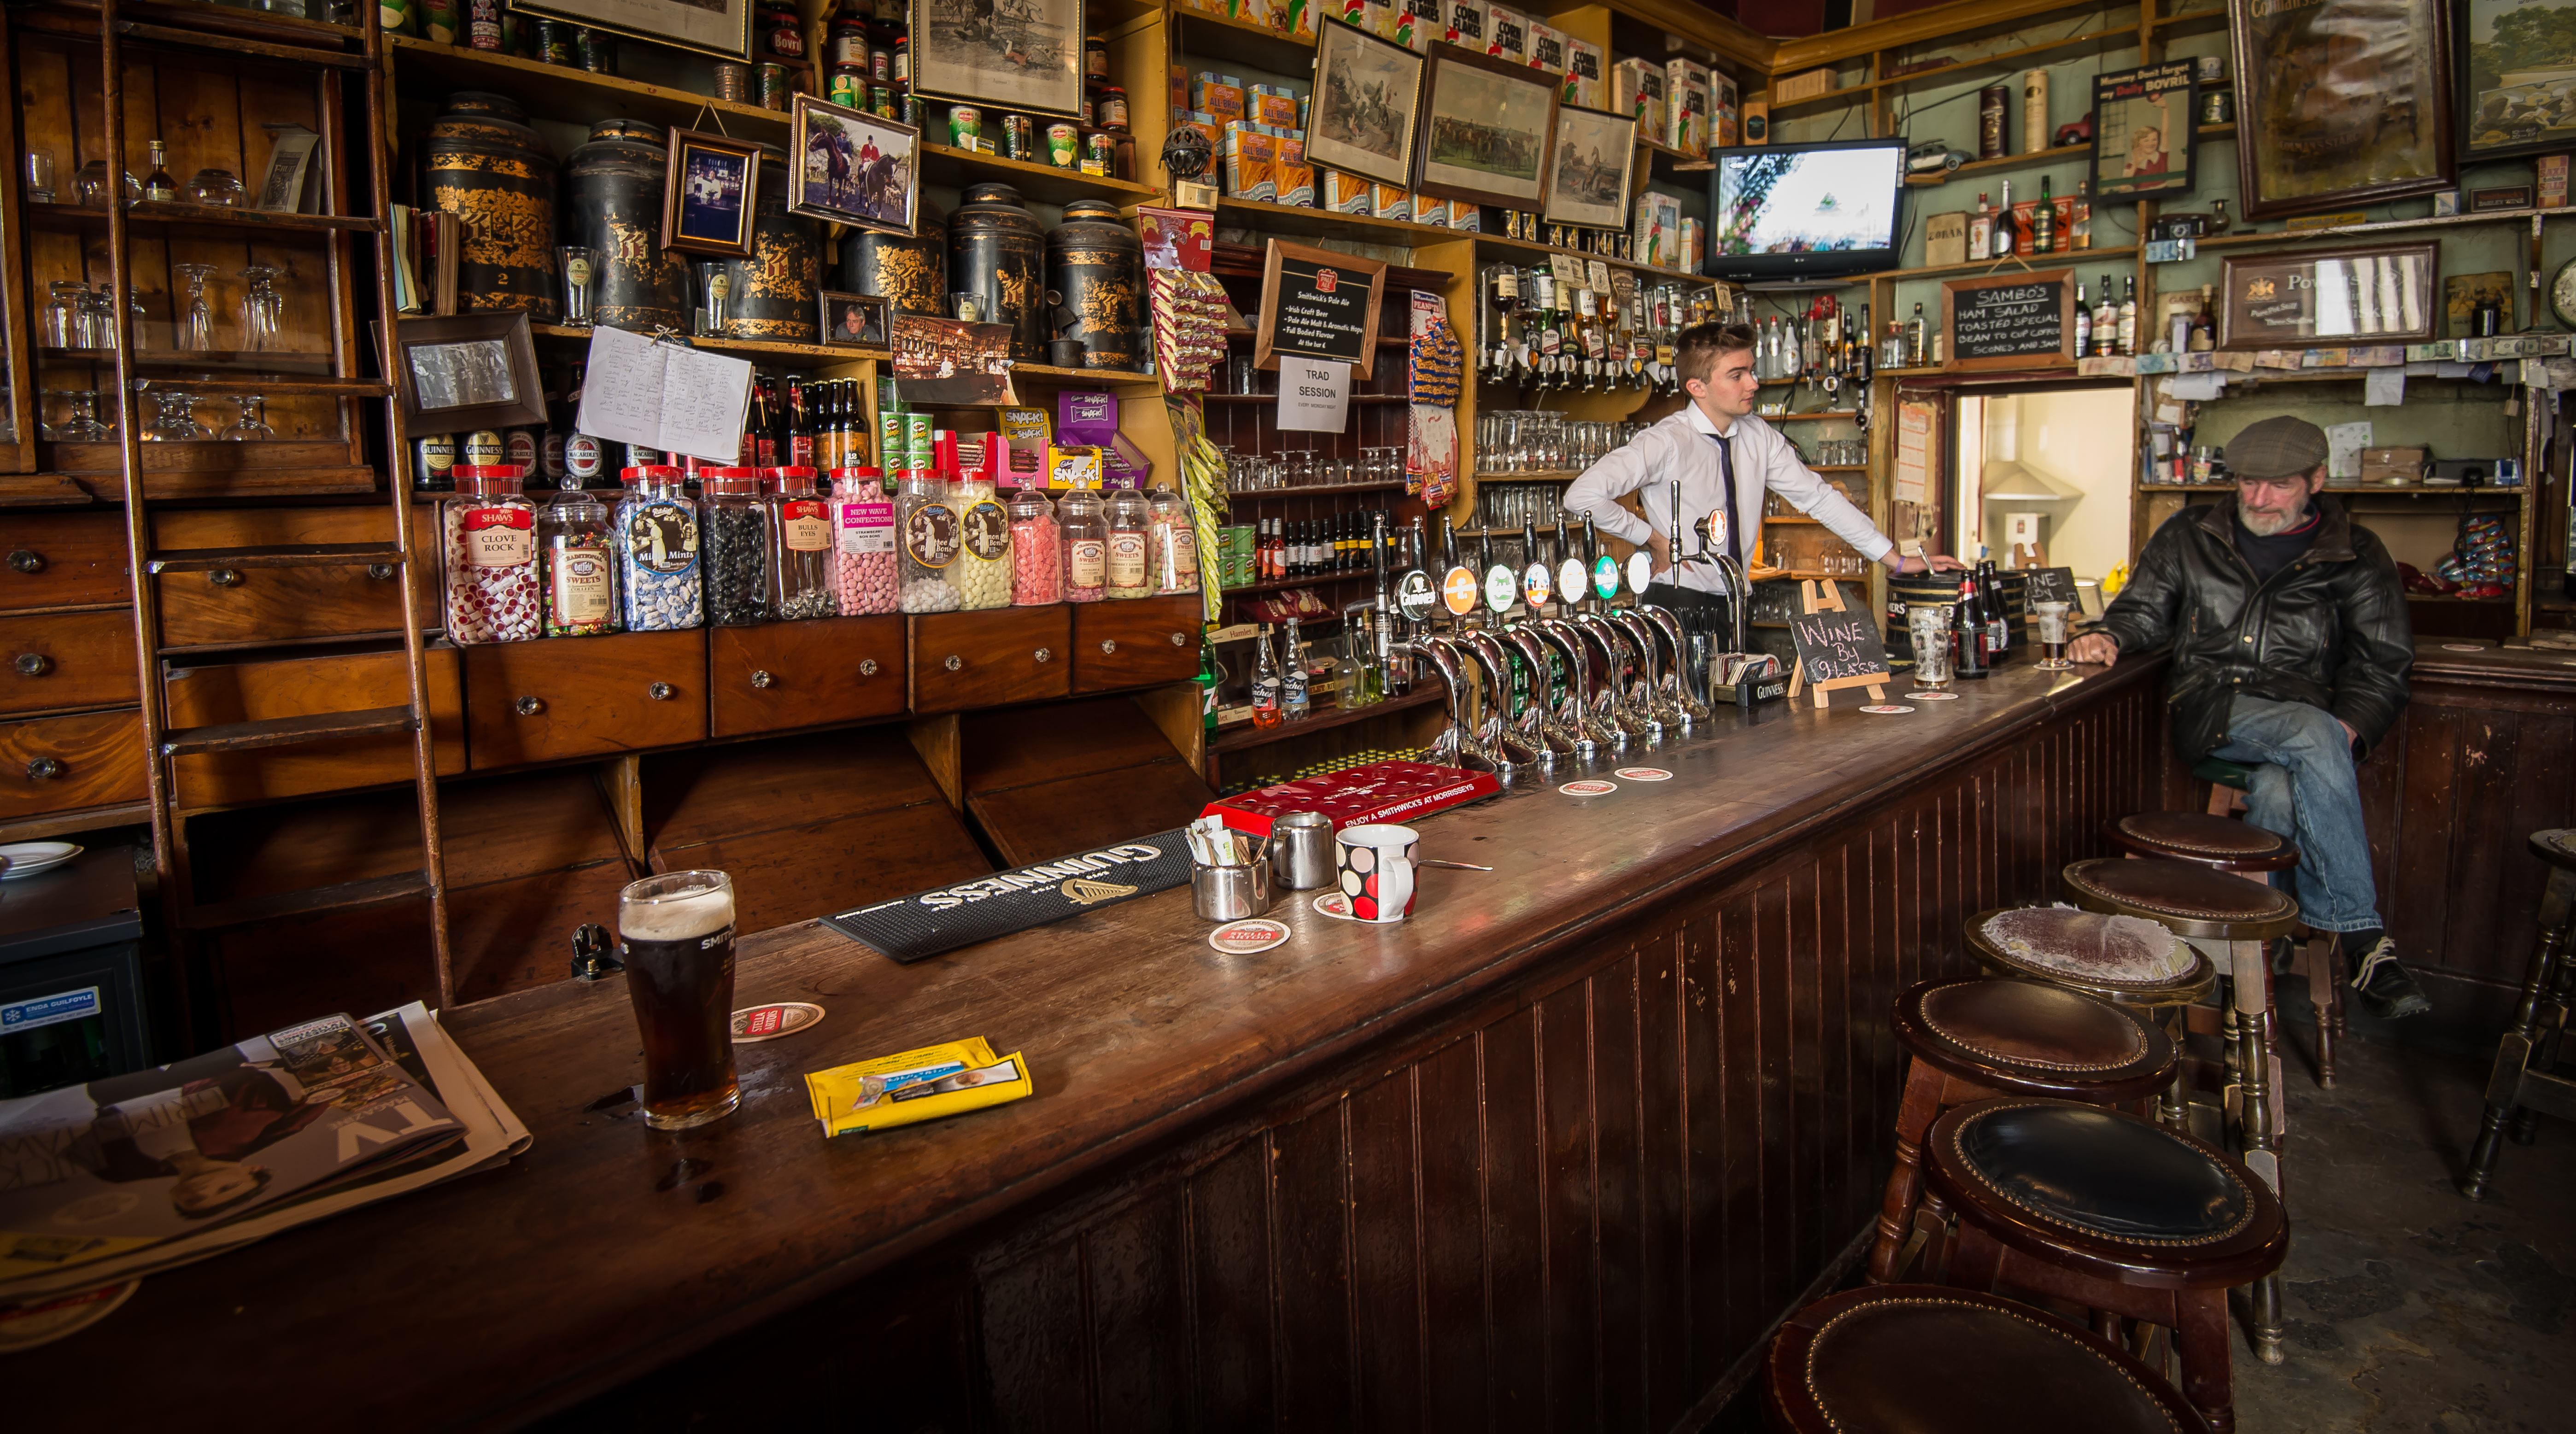 “A Proper Pint” presents: The Best Pubs in Ireland!